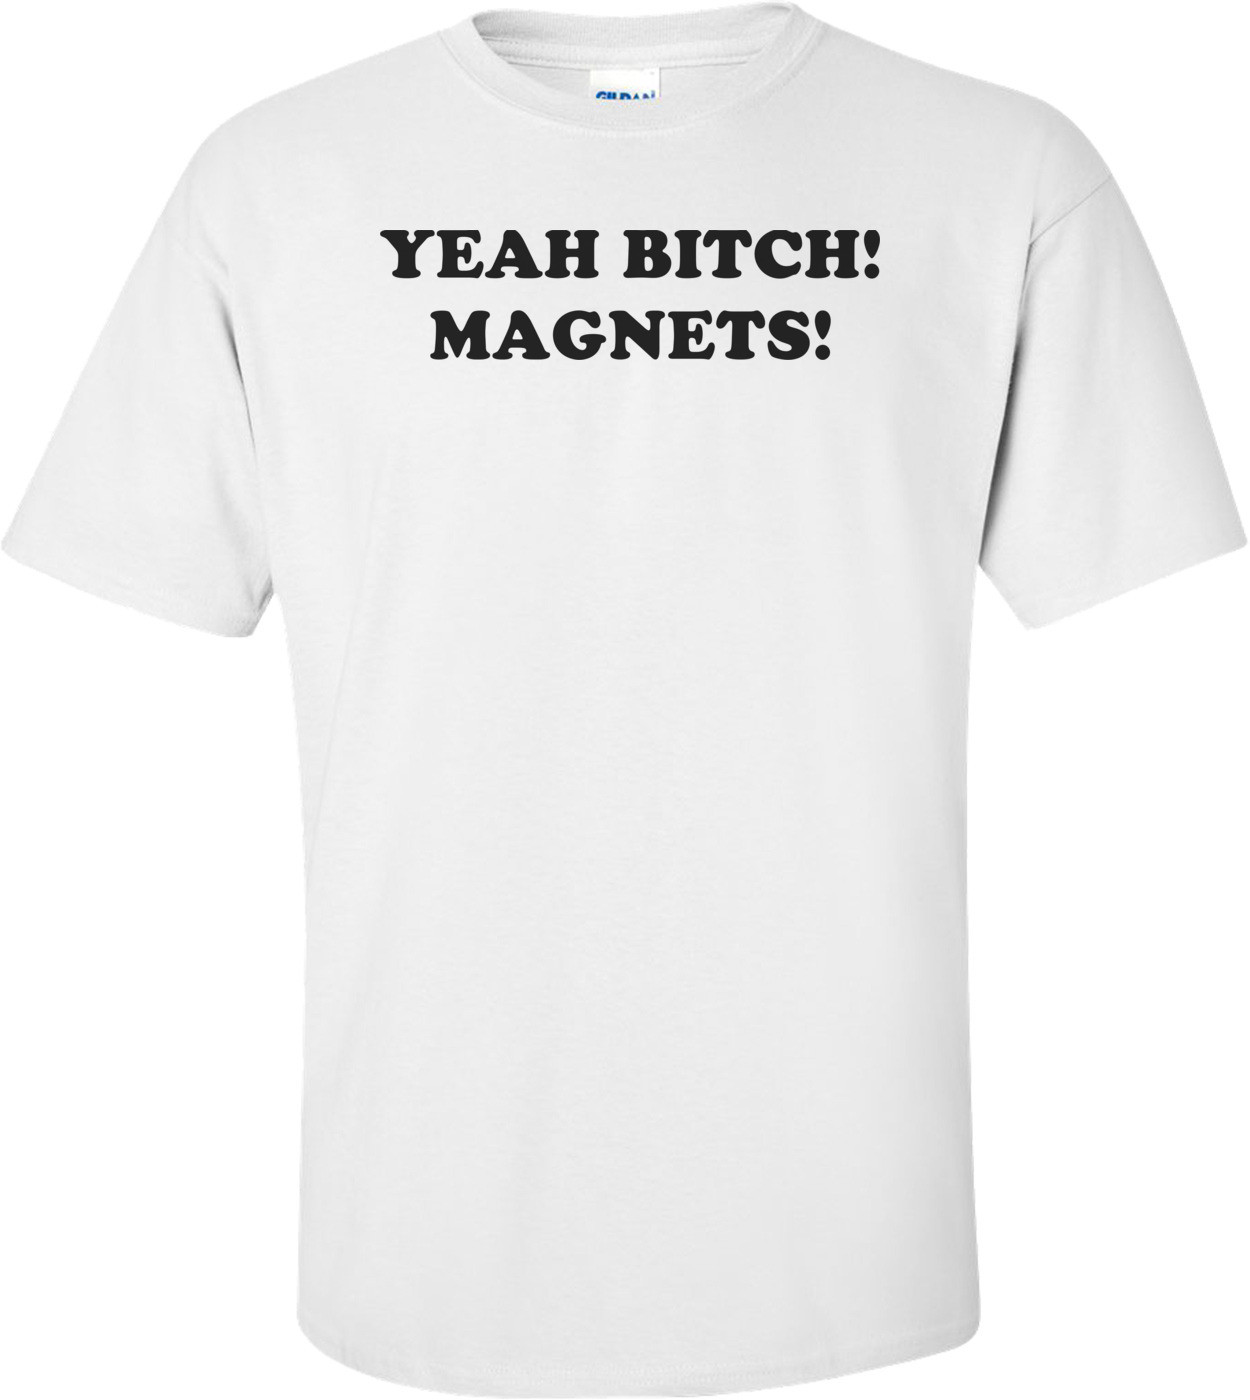 YEAH BITCH! MAGNETS!